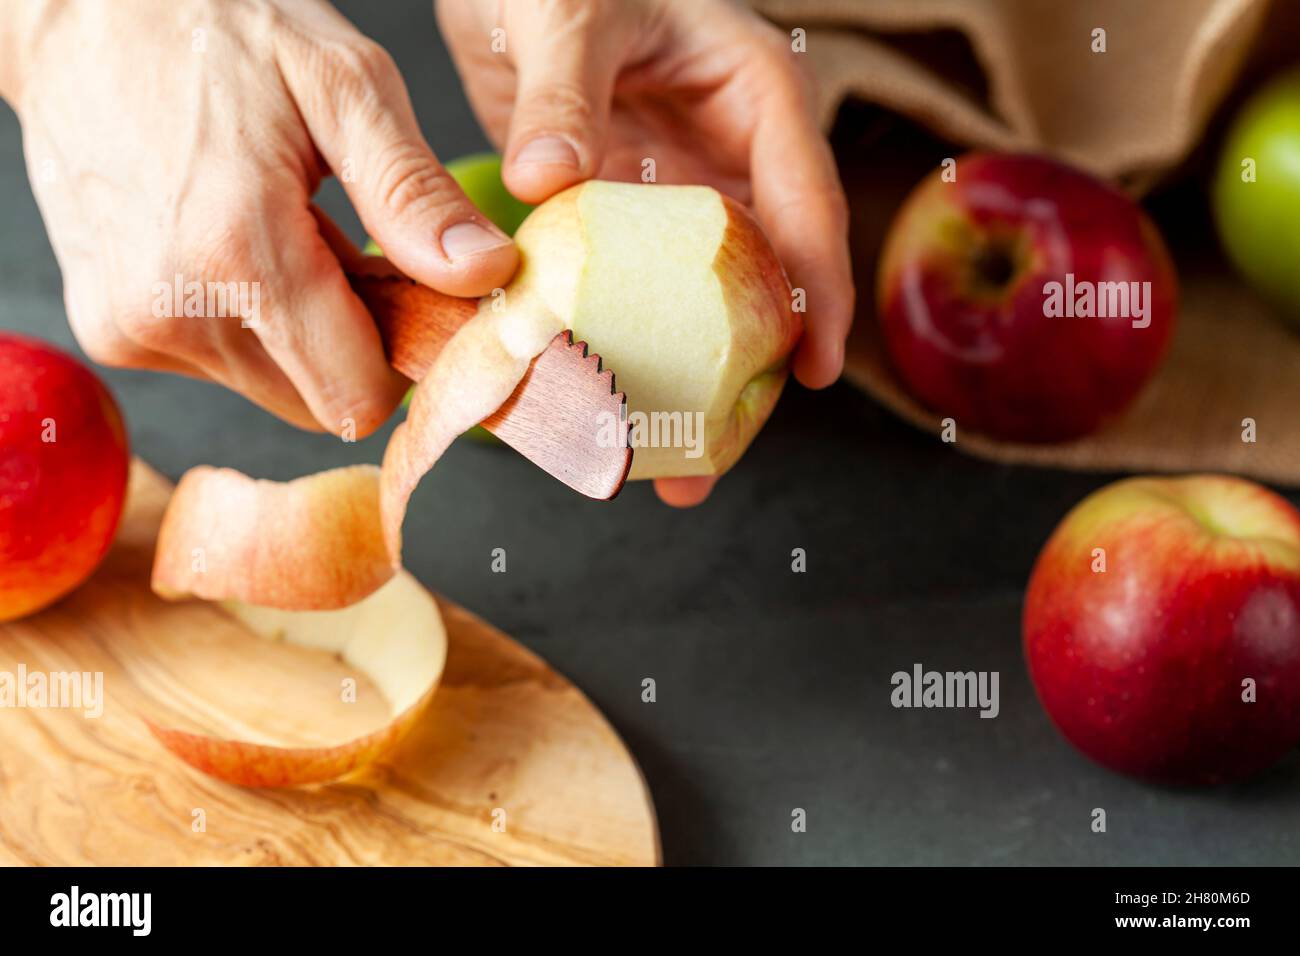 apples of different varieties are seen on dark stone and wooden background.  A woman is peeling the skin of an apple using a fruit knife. Healthy eati Stock Photo